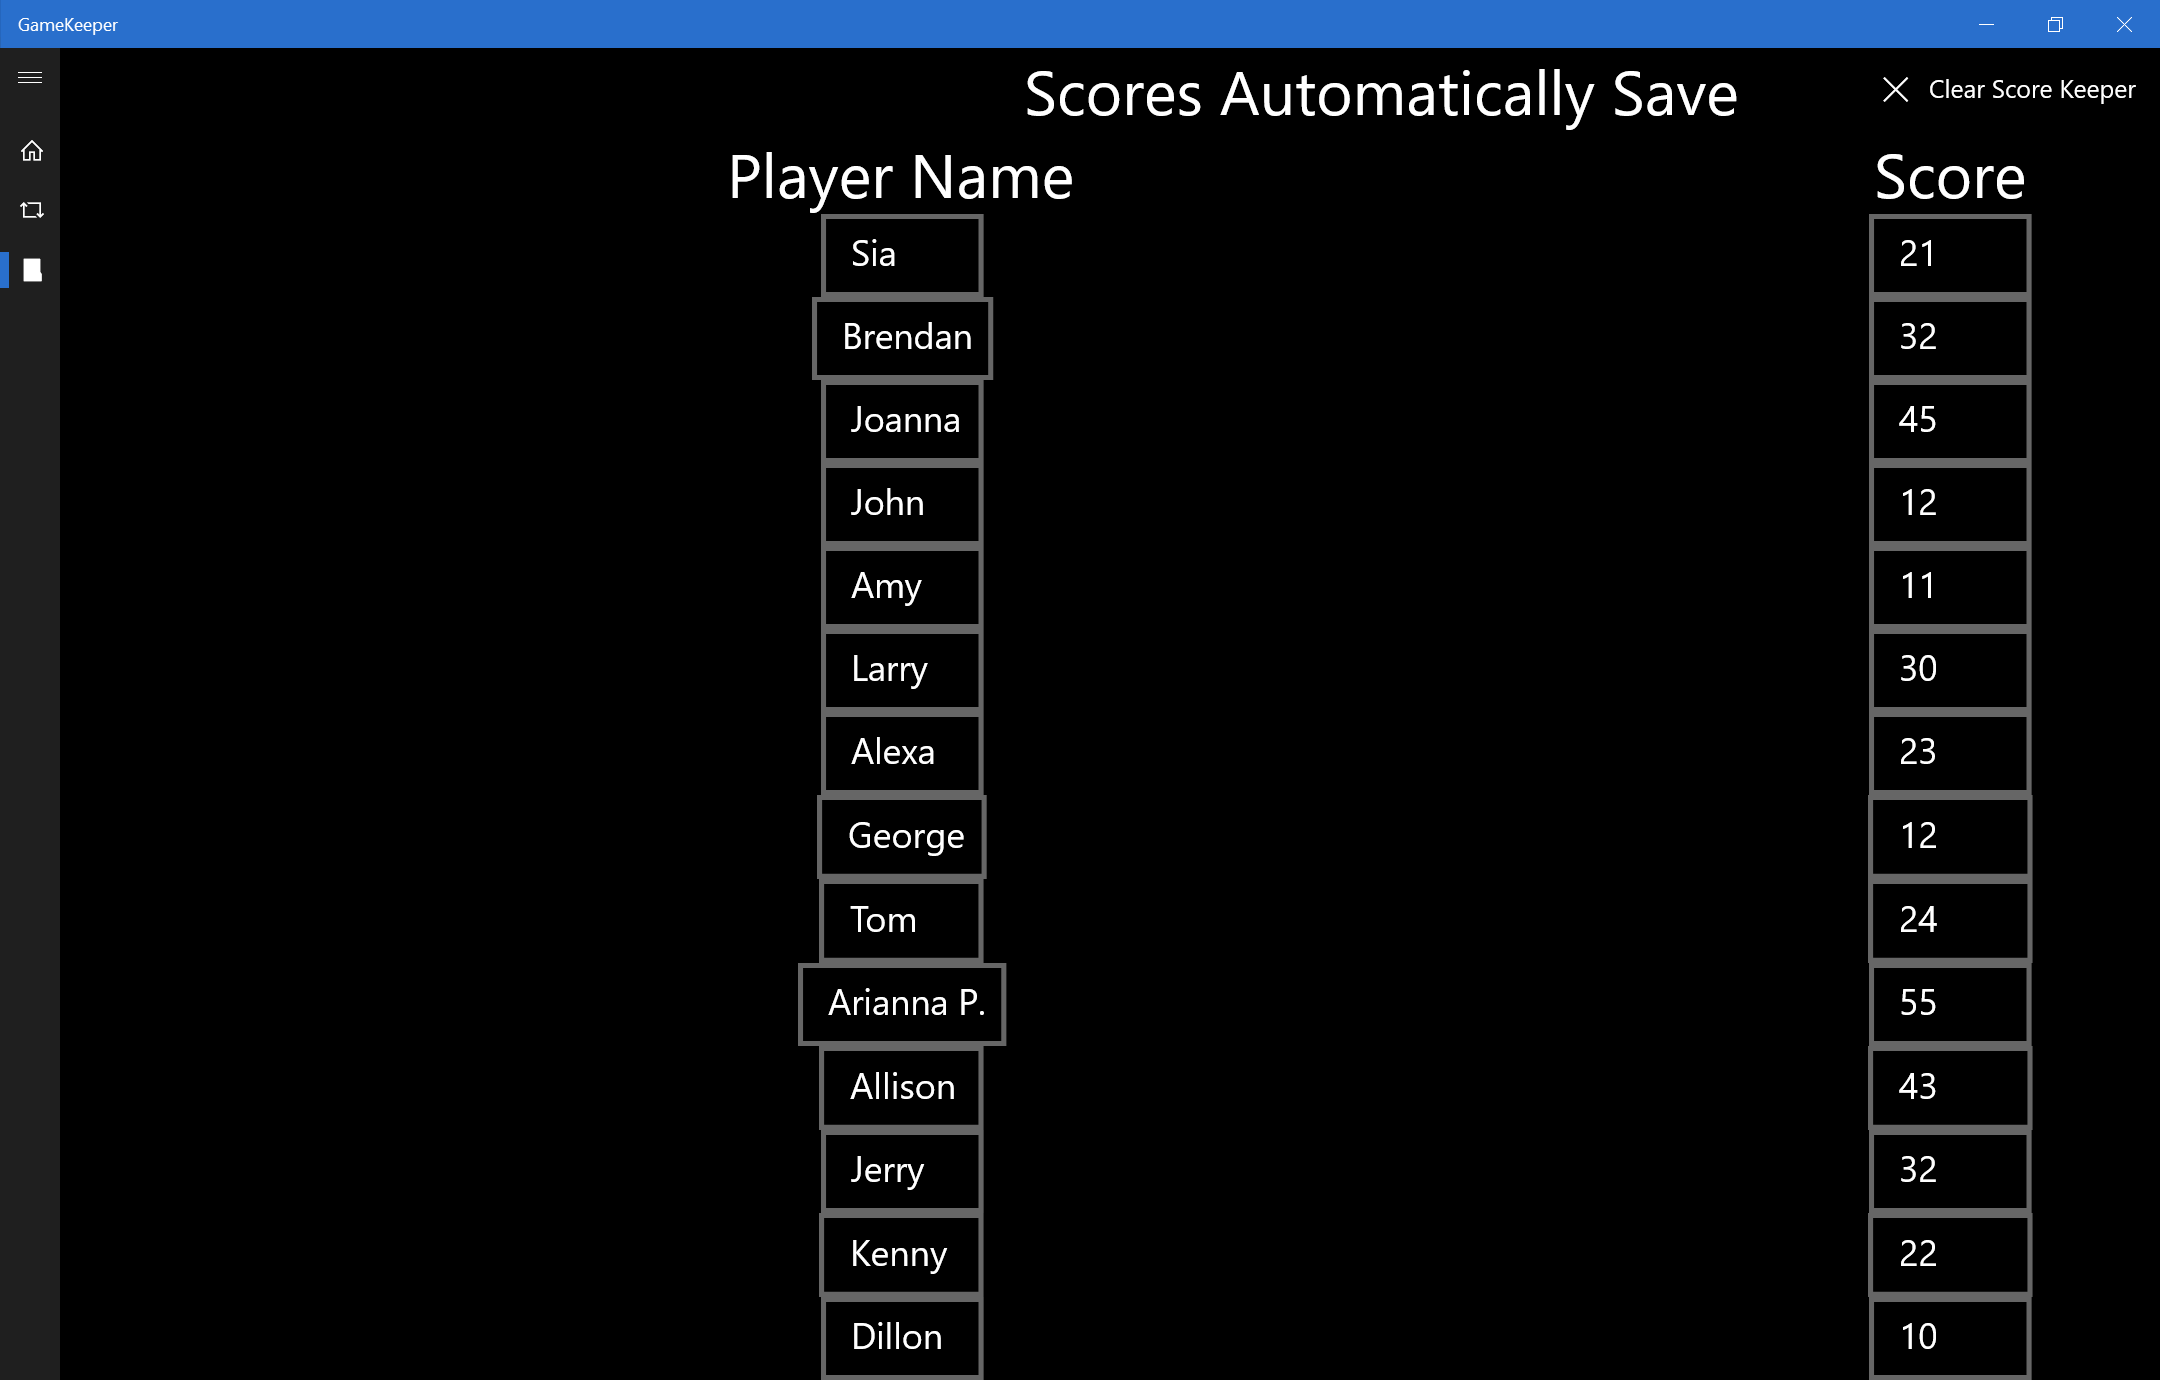 Finally, GameKeeper is equipped with a fully digital scoreboard capable of handling up to 14 players. It can track a player's name and score, and it saves that information automatically so you can navigate to a different function of the app or even close the app entirely and return to find your scores still there.